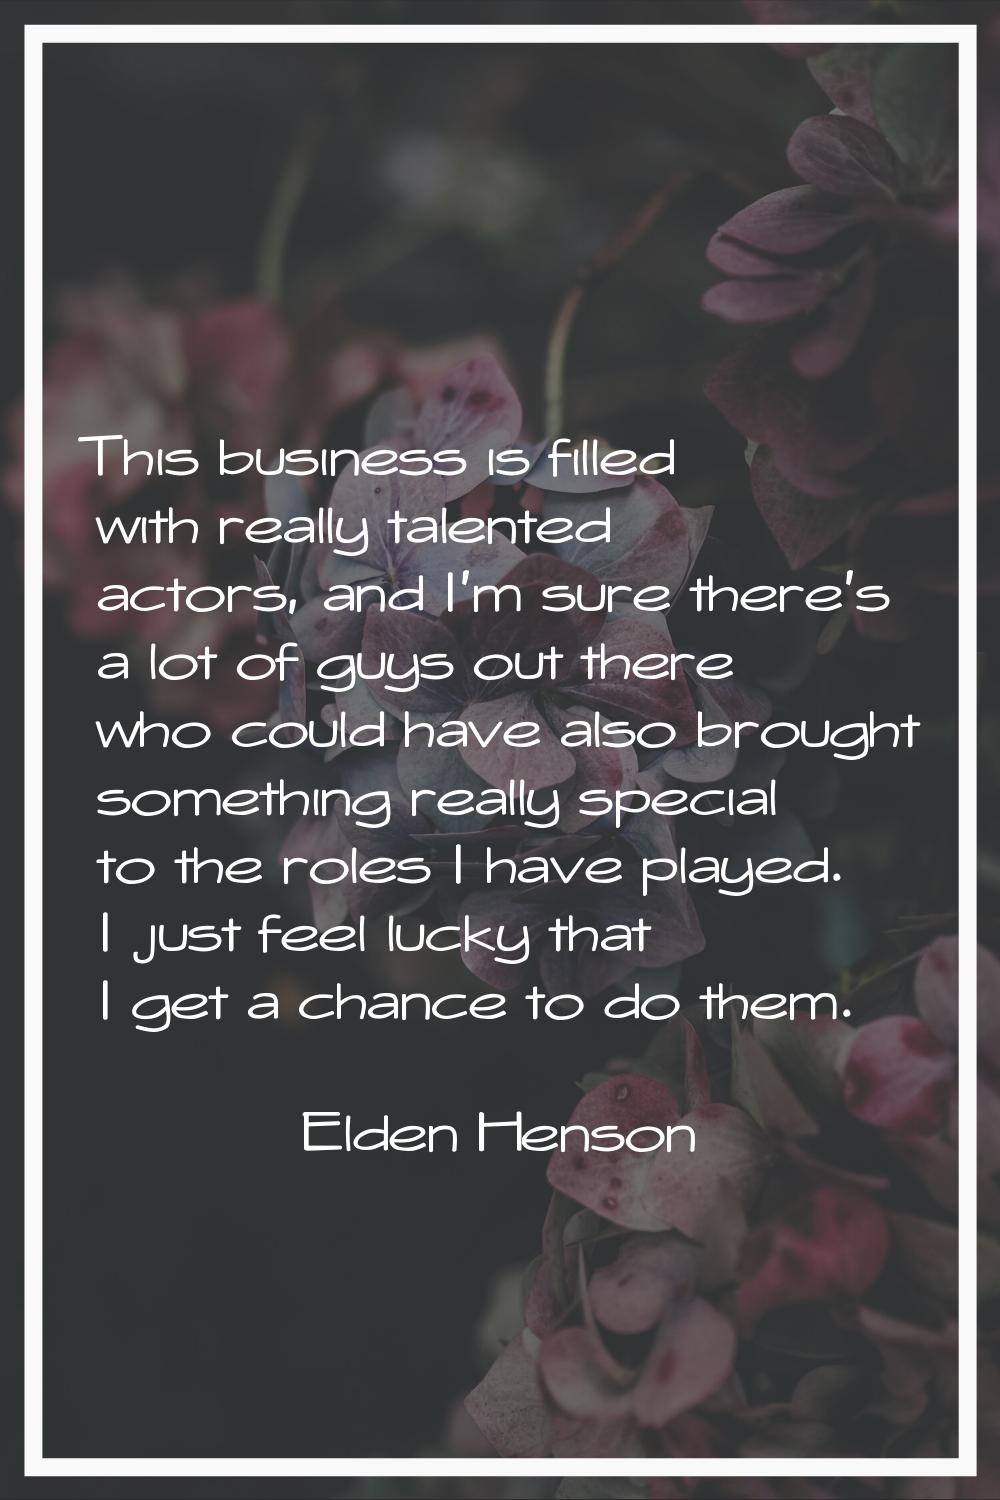 This business is filled with really talented actors, and I'm sure there's a lot of guys out there w